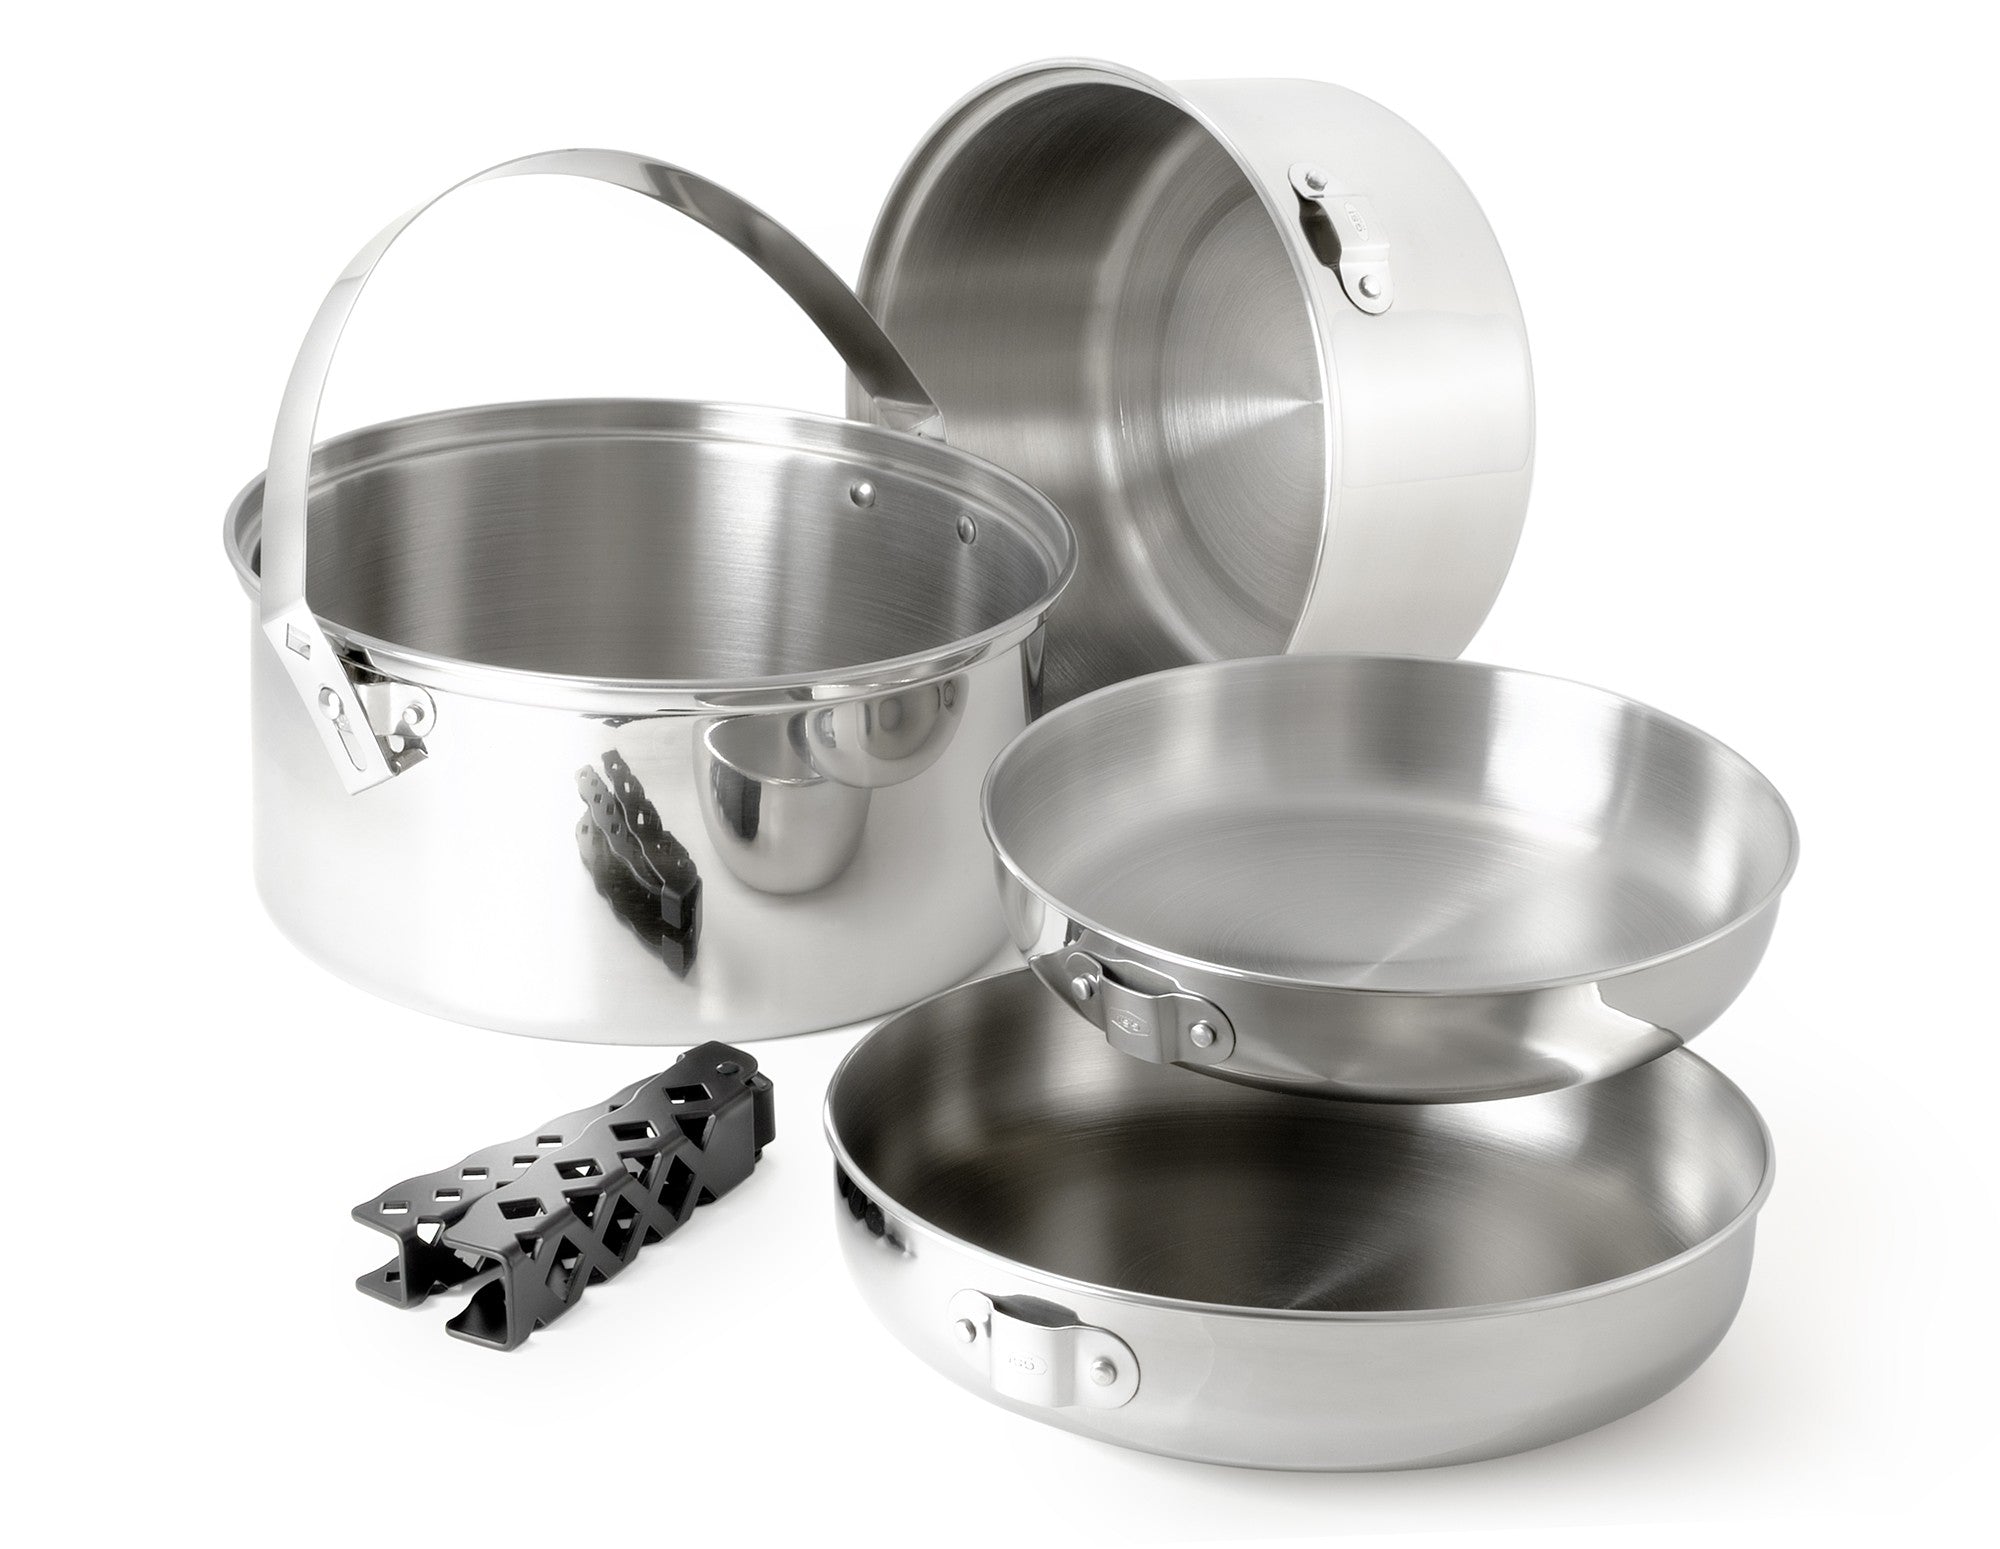 Glacier Stainless Cookset